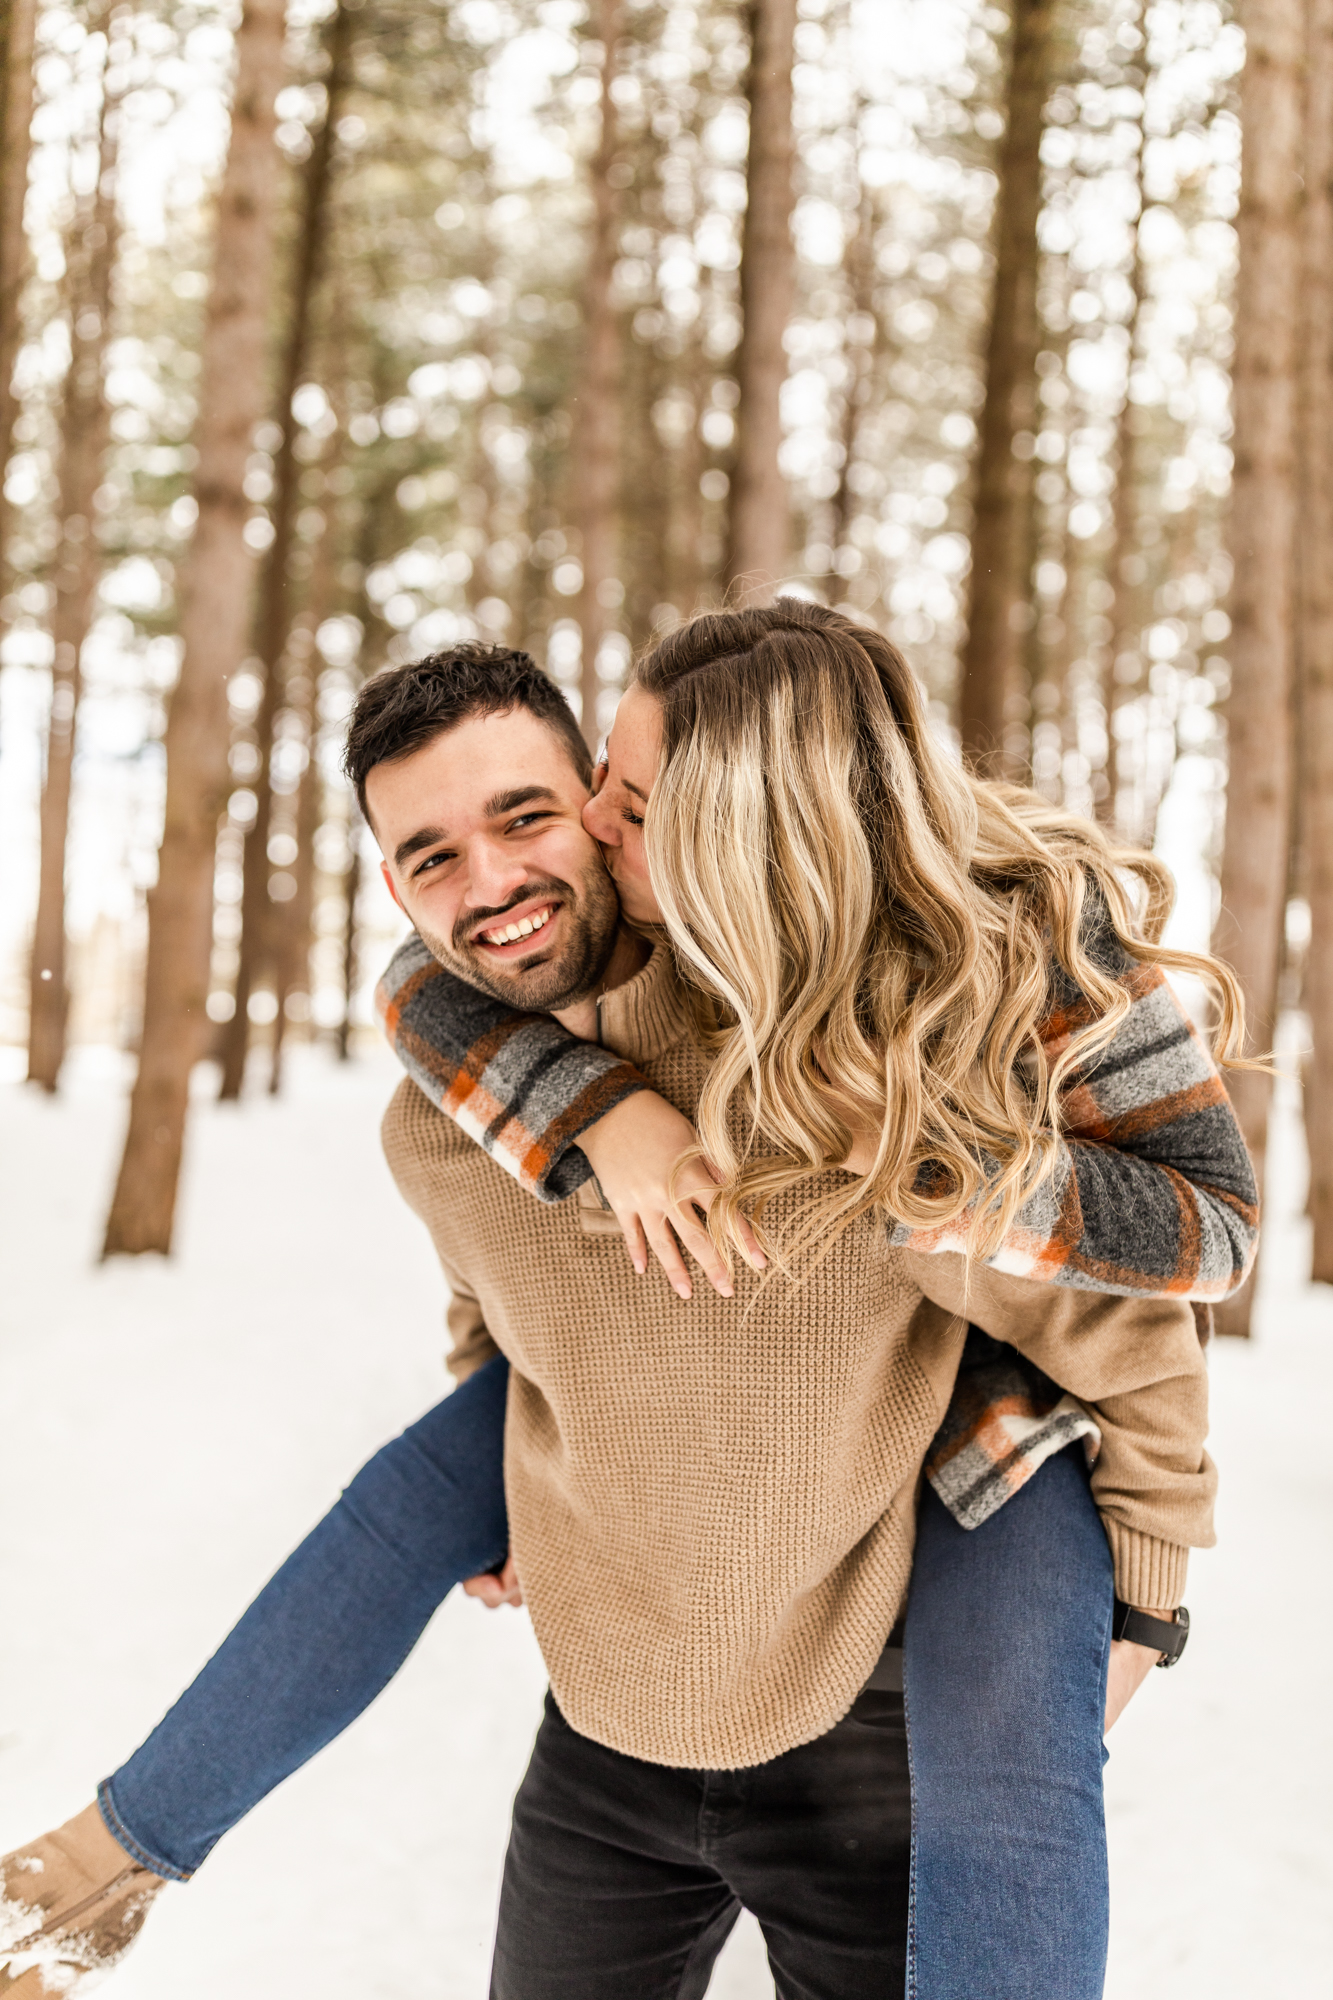 Man carrying woman on his back and smiling in engagement photos in the snow